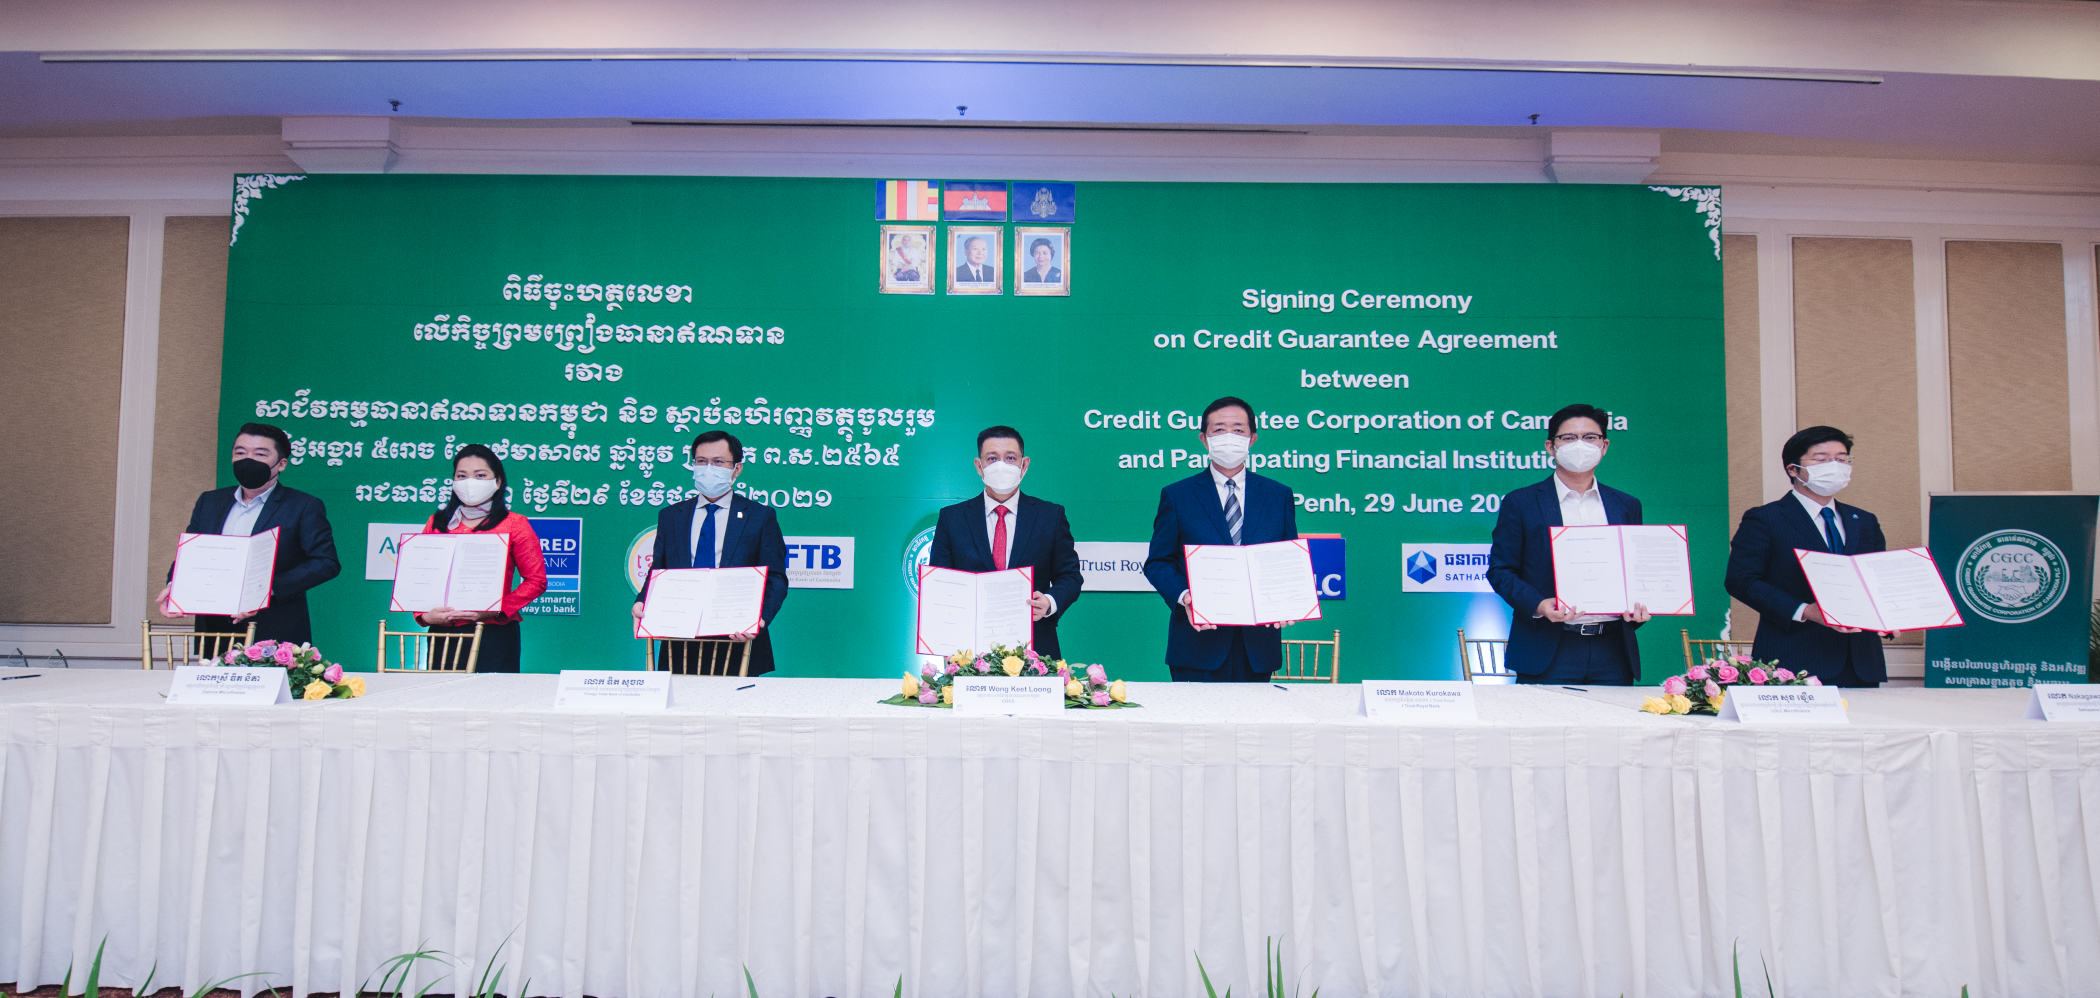 CGCC Introduces Credit Guarantee Mechanisms and Benefits for Banks, MFIs and Businesses